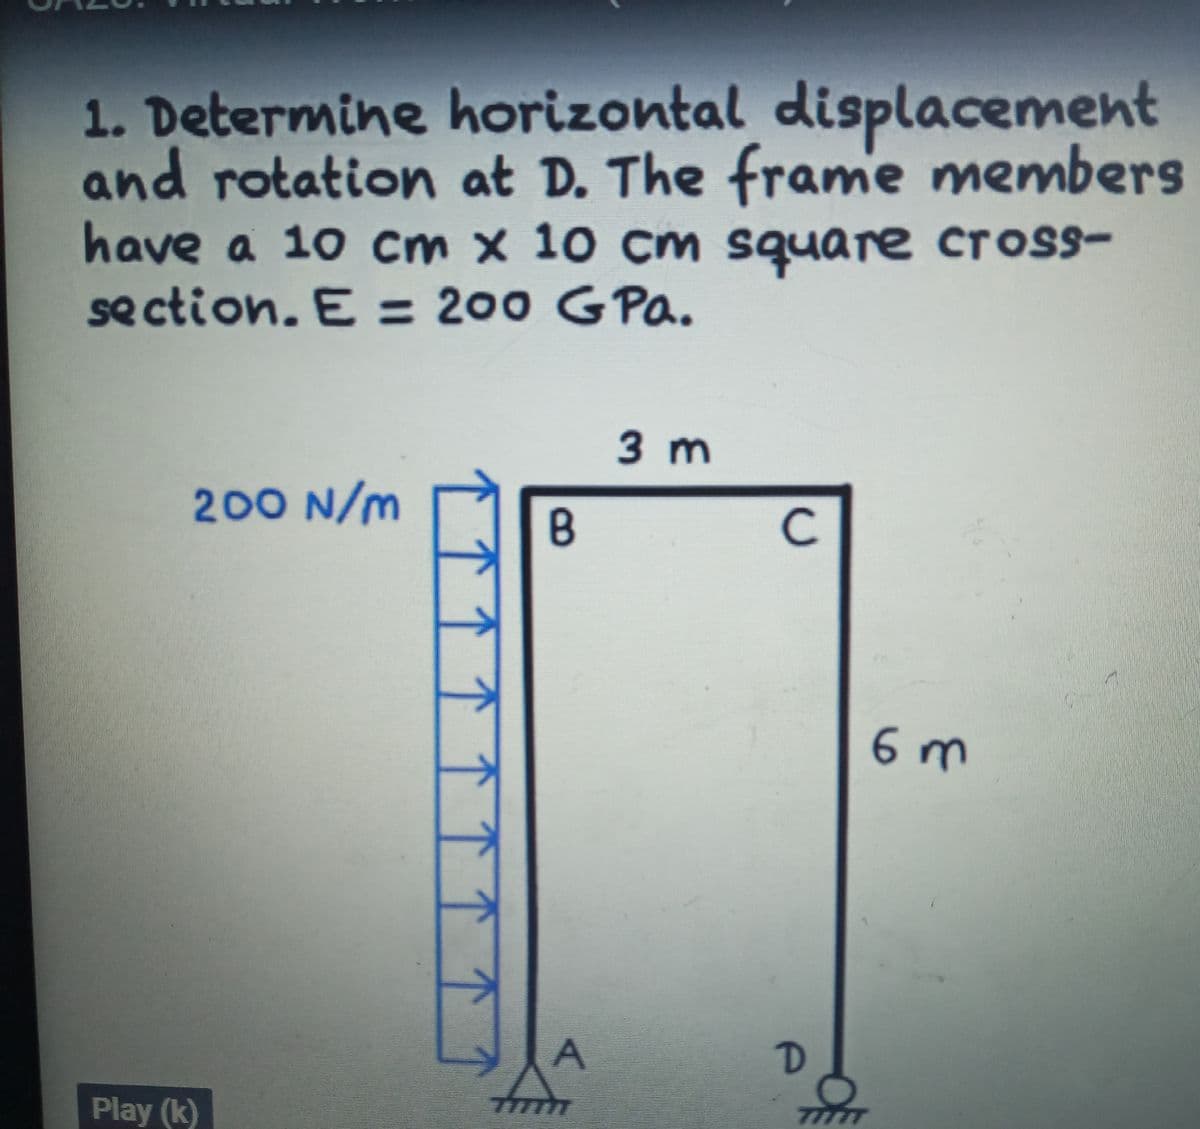 1. Determine horizontal displacement
and rotation at D. The frame members
have a 10 cm x 10 cm square cross-
se ction. E = 200 GPa.
3 m
200 N/m
C.
6 m
Play (k)
77777
7777T
